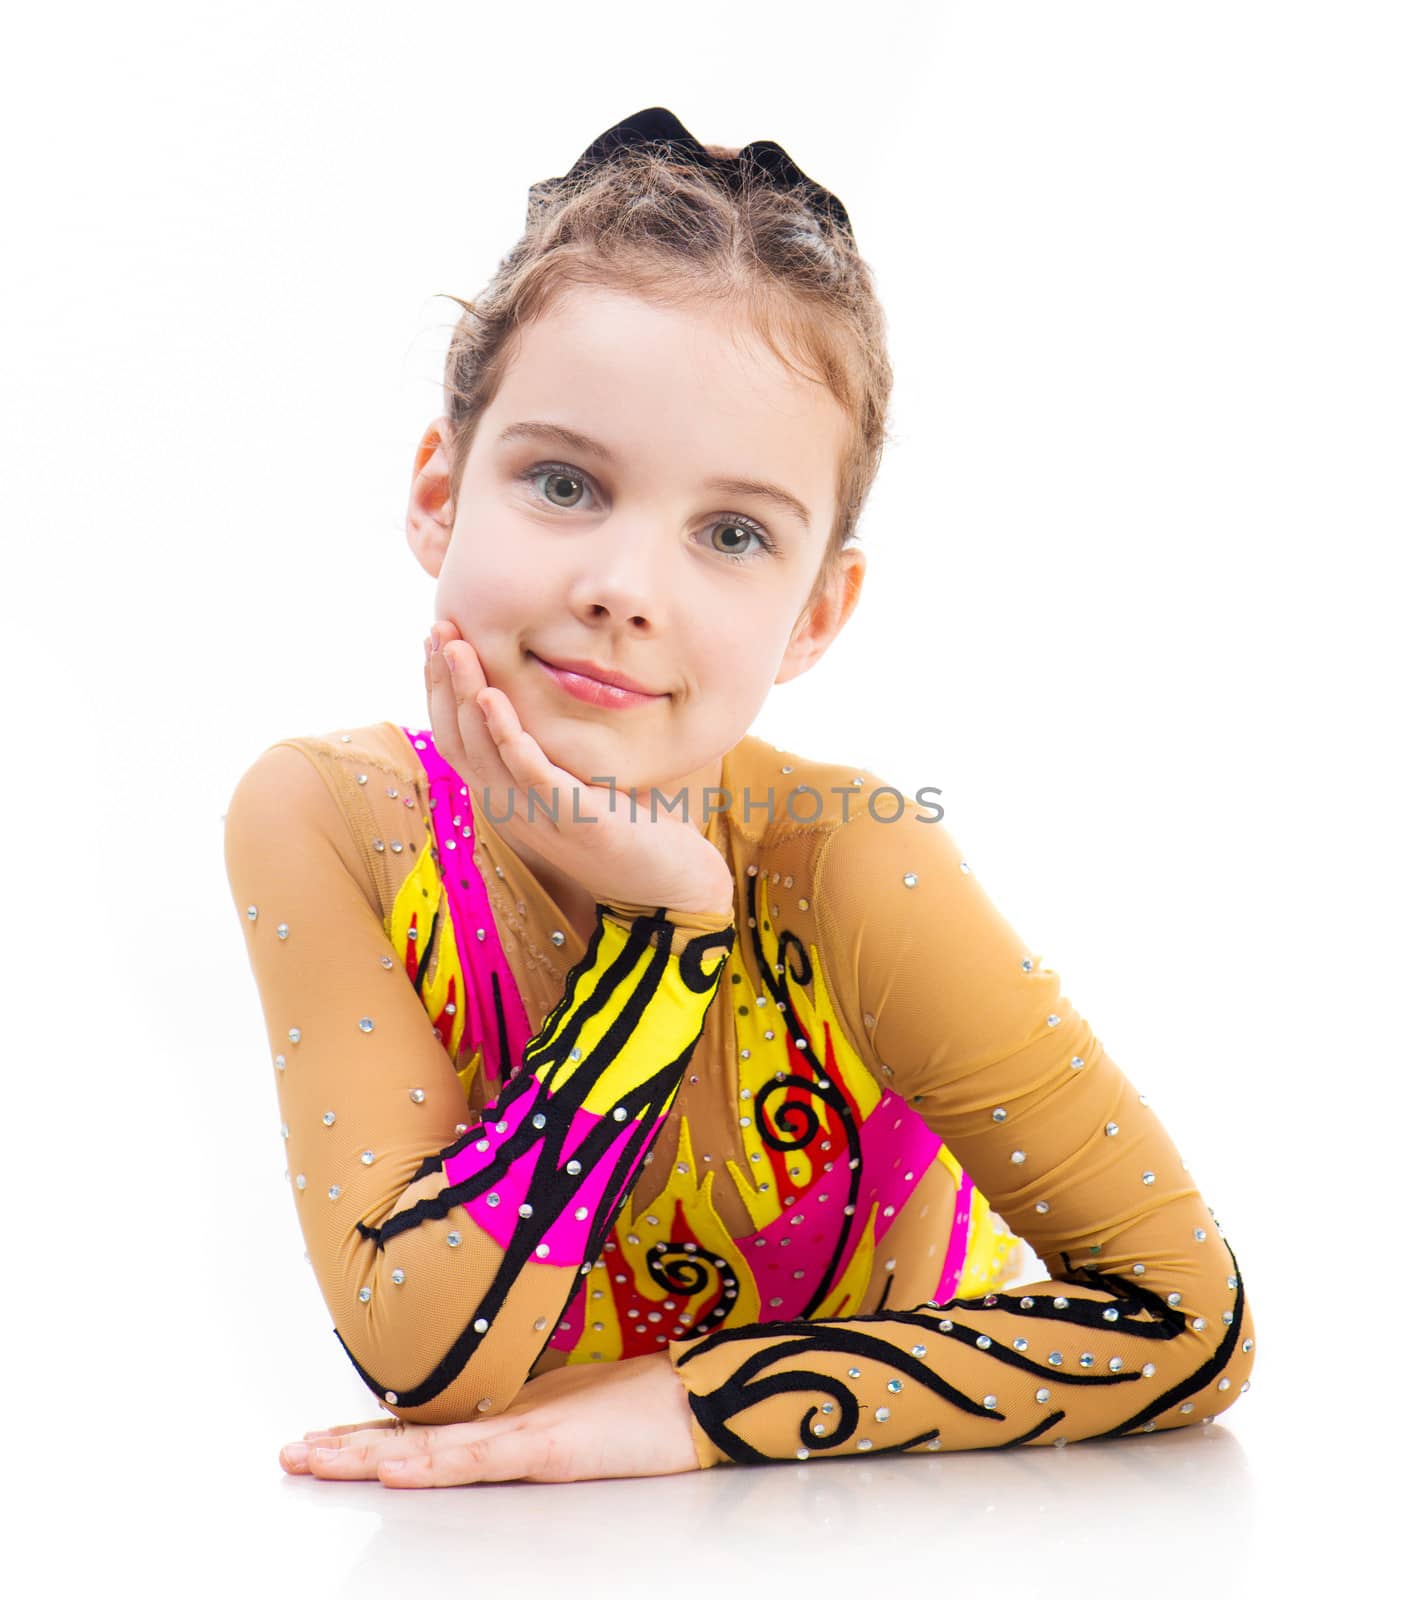 beautiful little girl gymnast on a white background